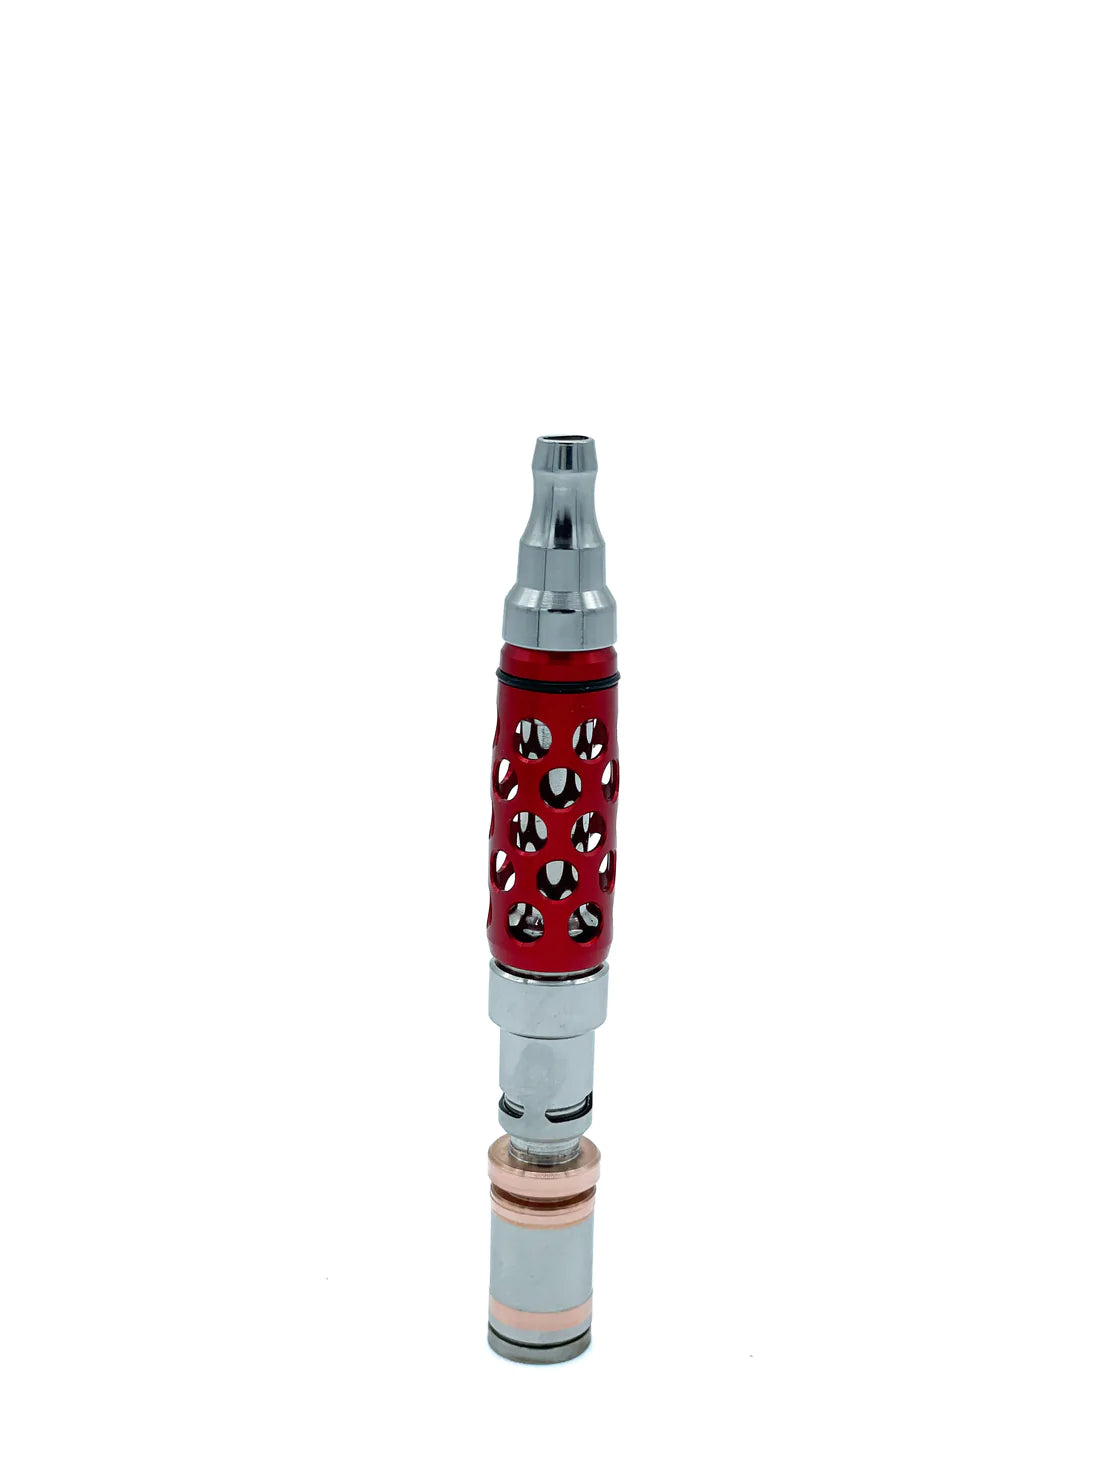 The Anvil Mechanical Herbal Vaporizer w/ ThermoCore Oven by Vestratto